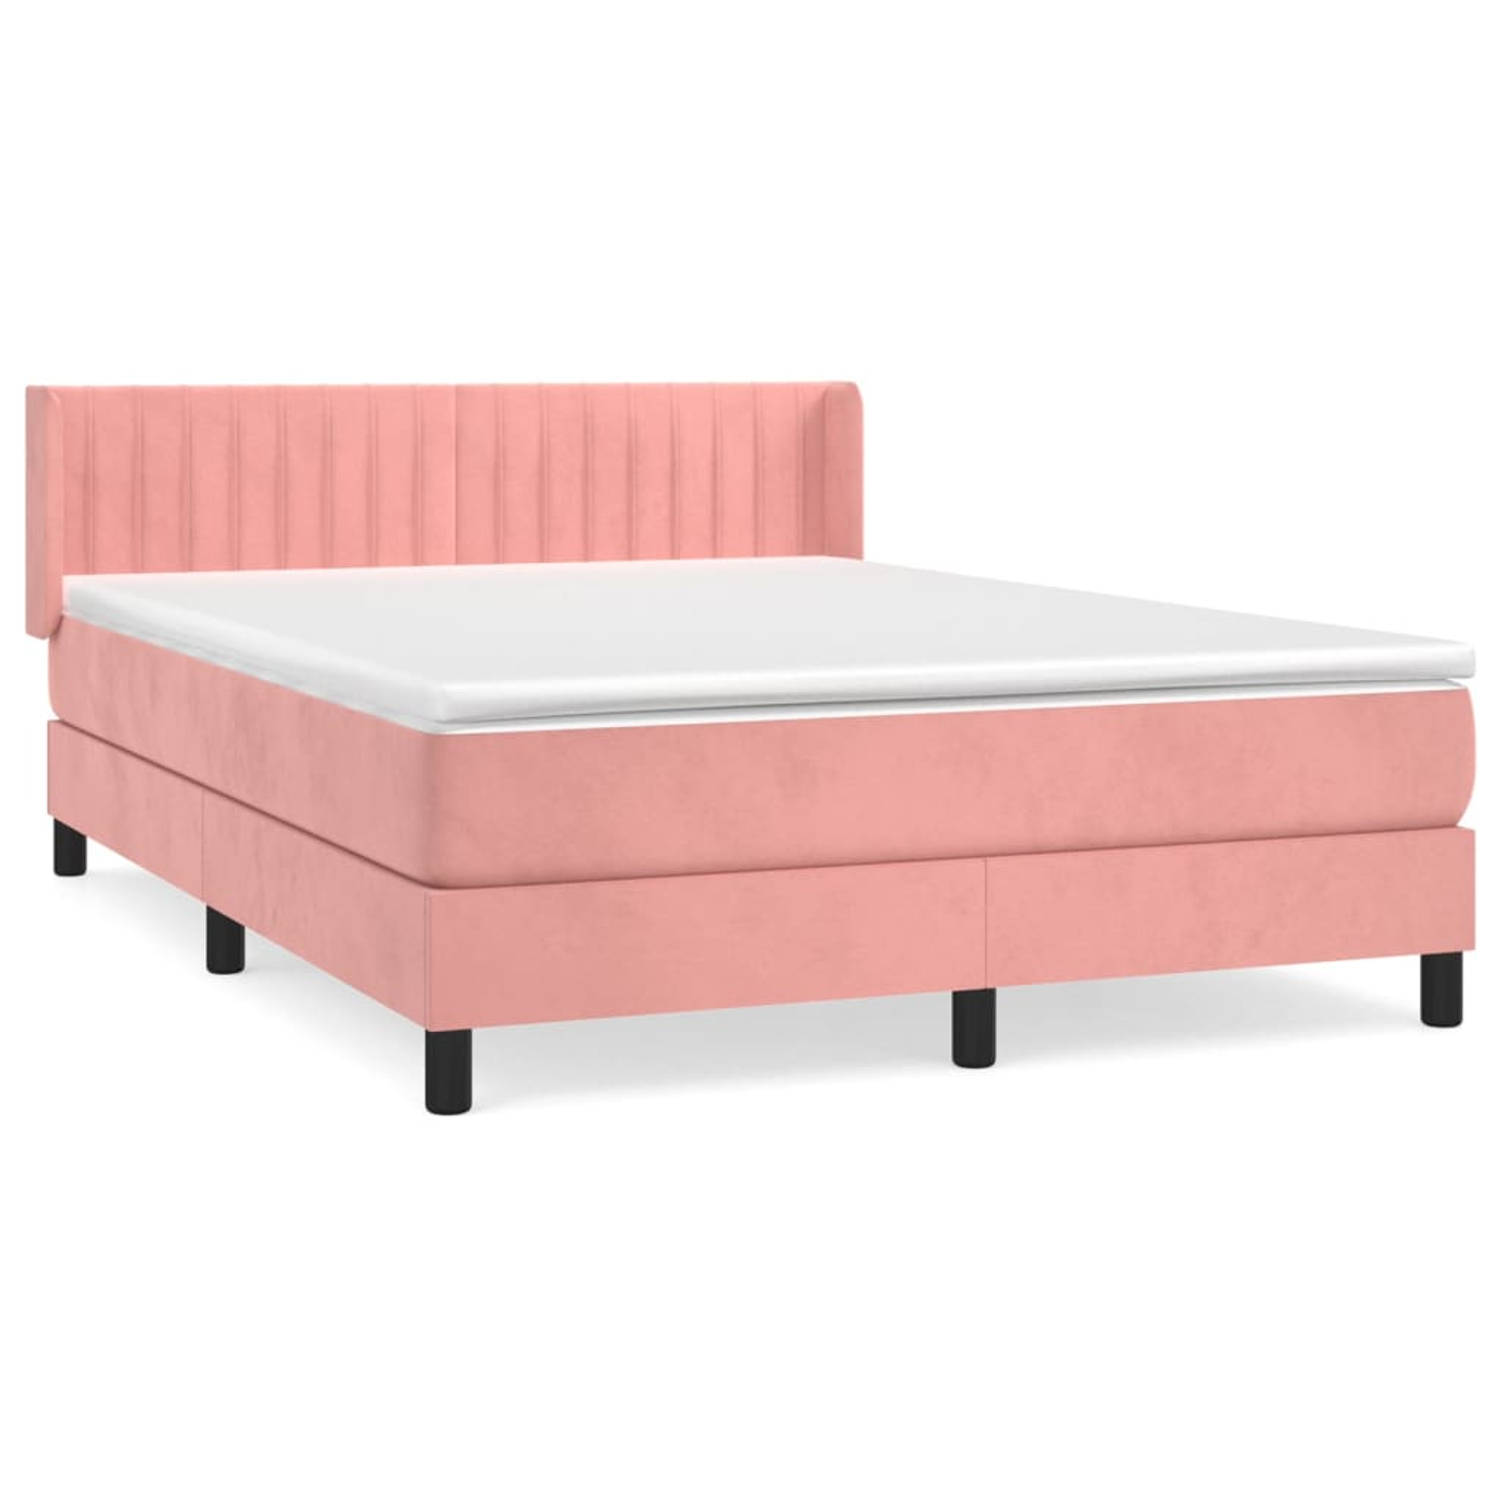 The Living Store Boxspringbed - fluweel - 203x147x78/88 cm - roze